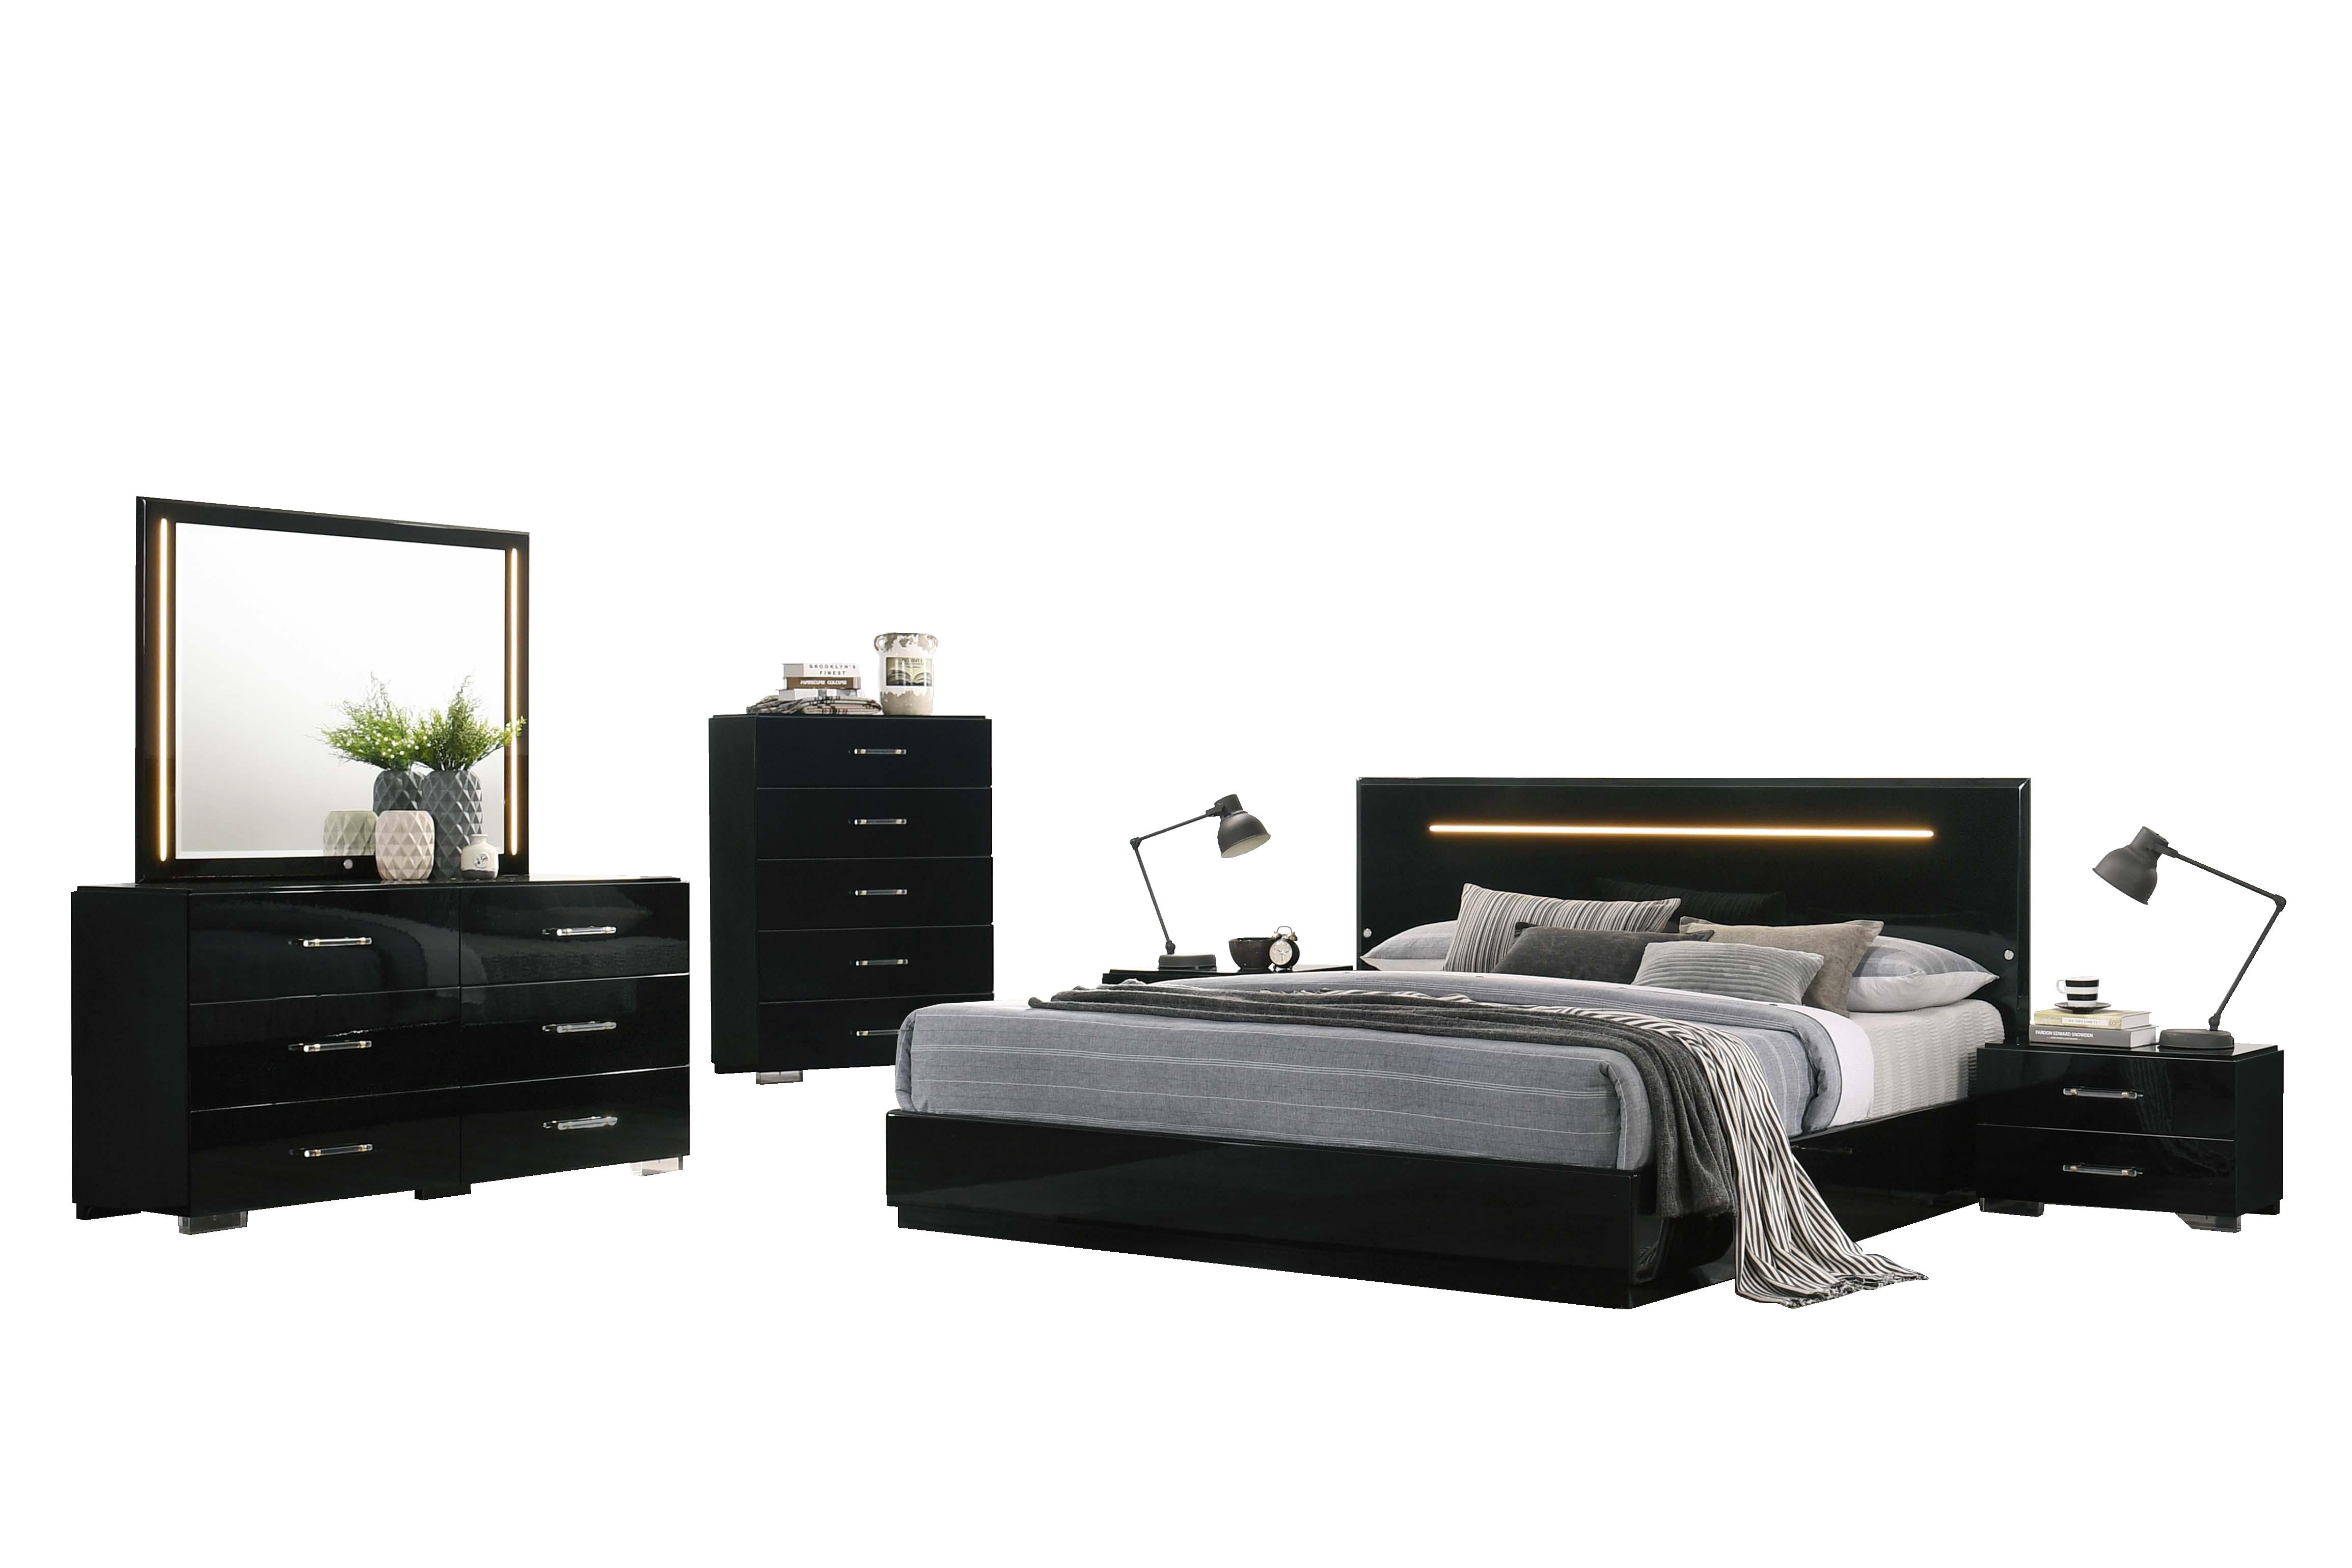 

    
High Gloss Black Finish Platform Queen Size Bedroom Set 6Pcs Florence by Chintaly Imports
